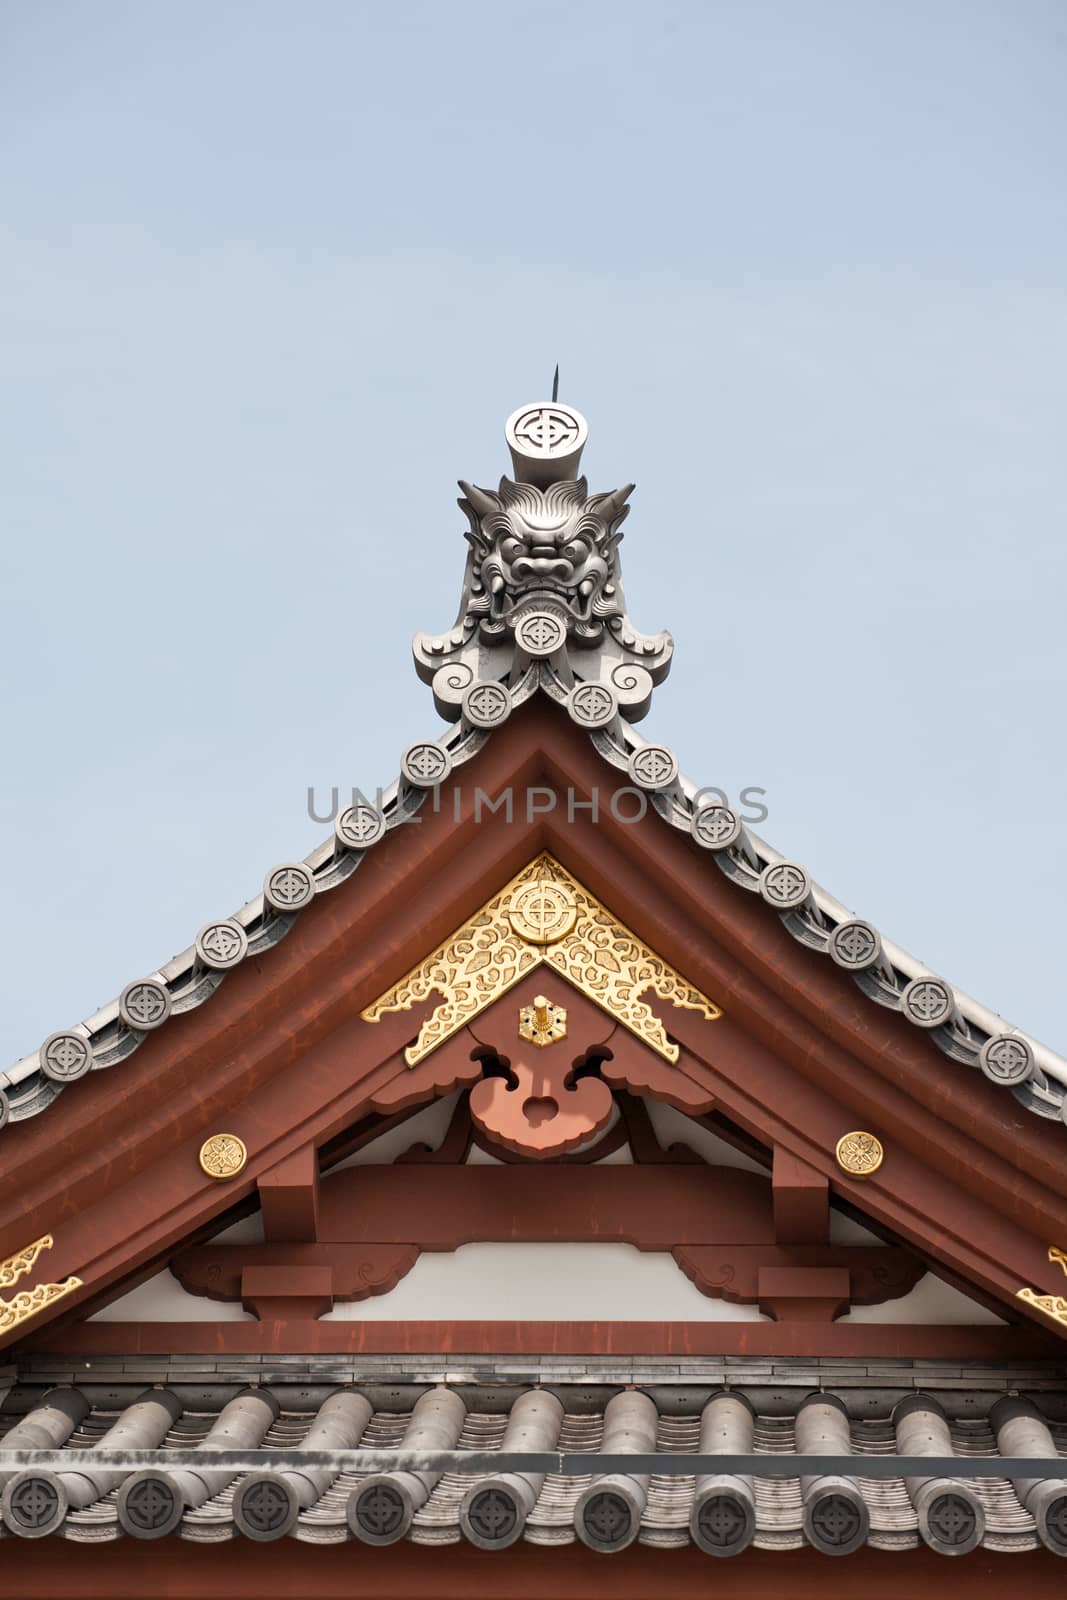 Detail on japanese temple roof against blue sky